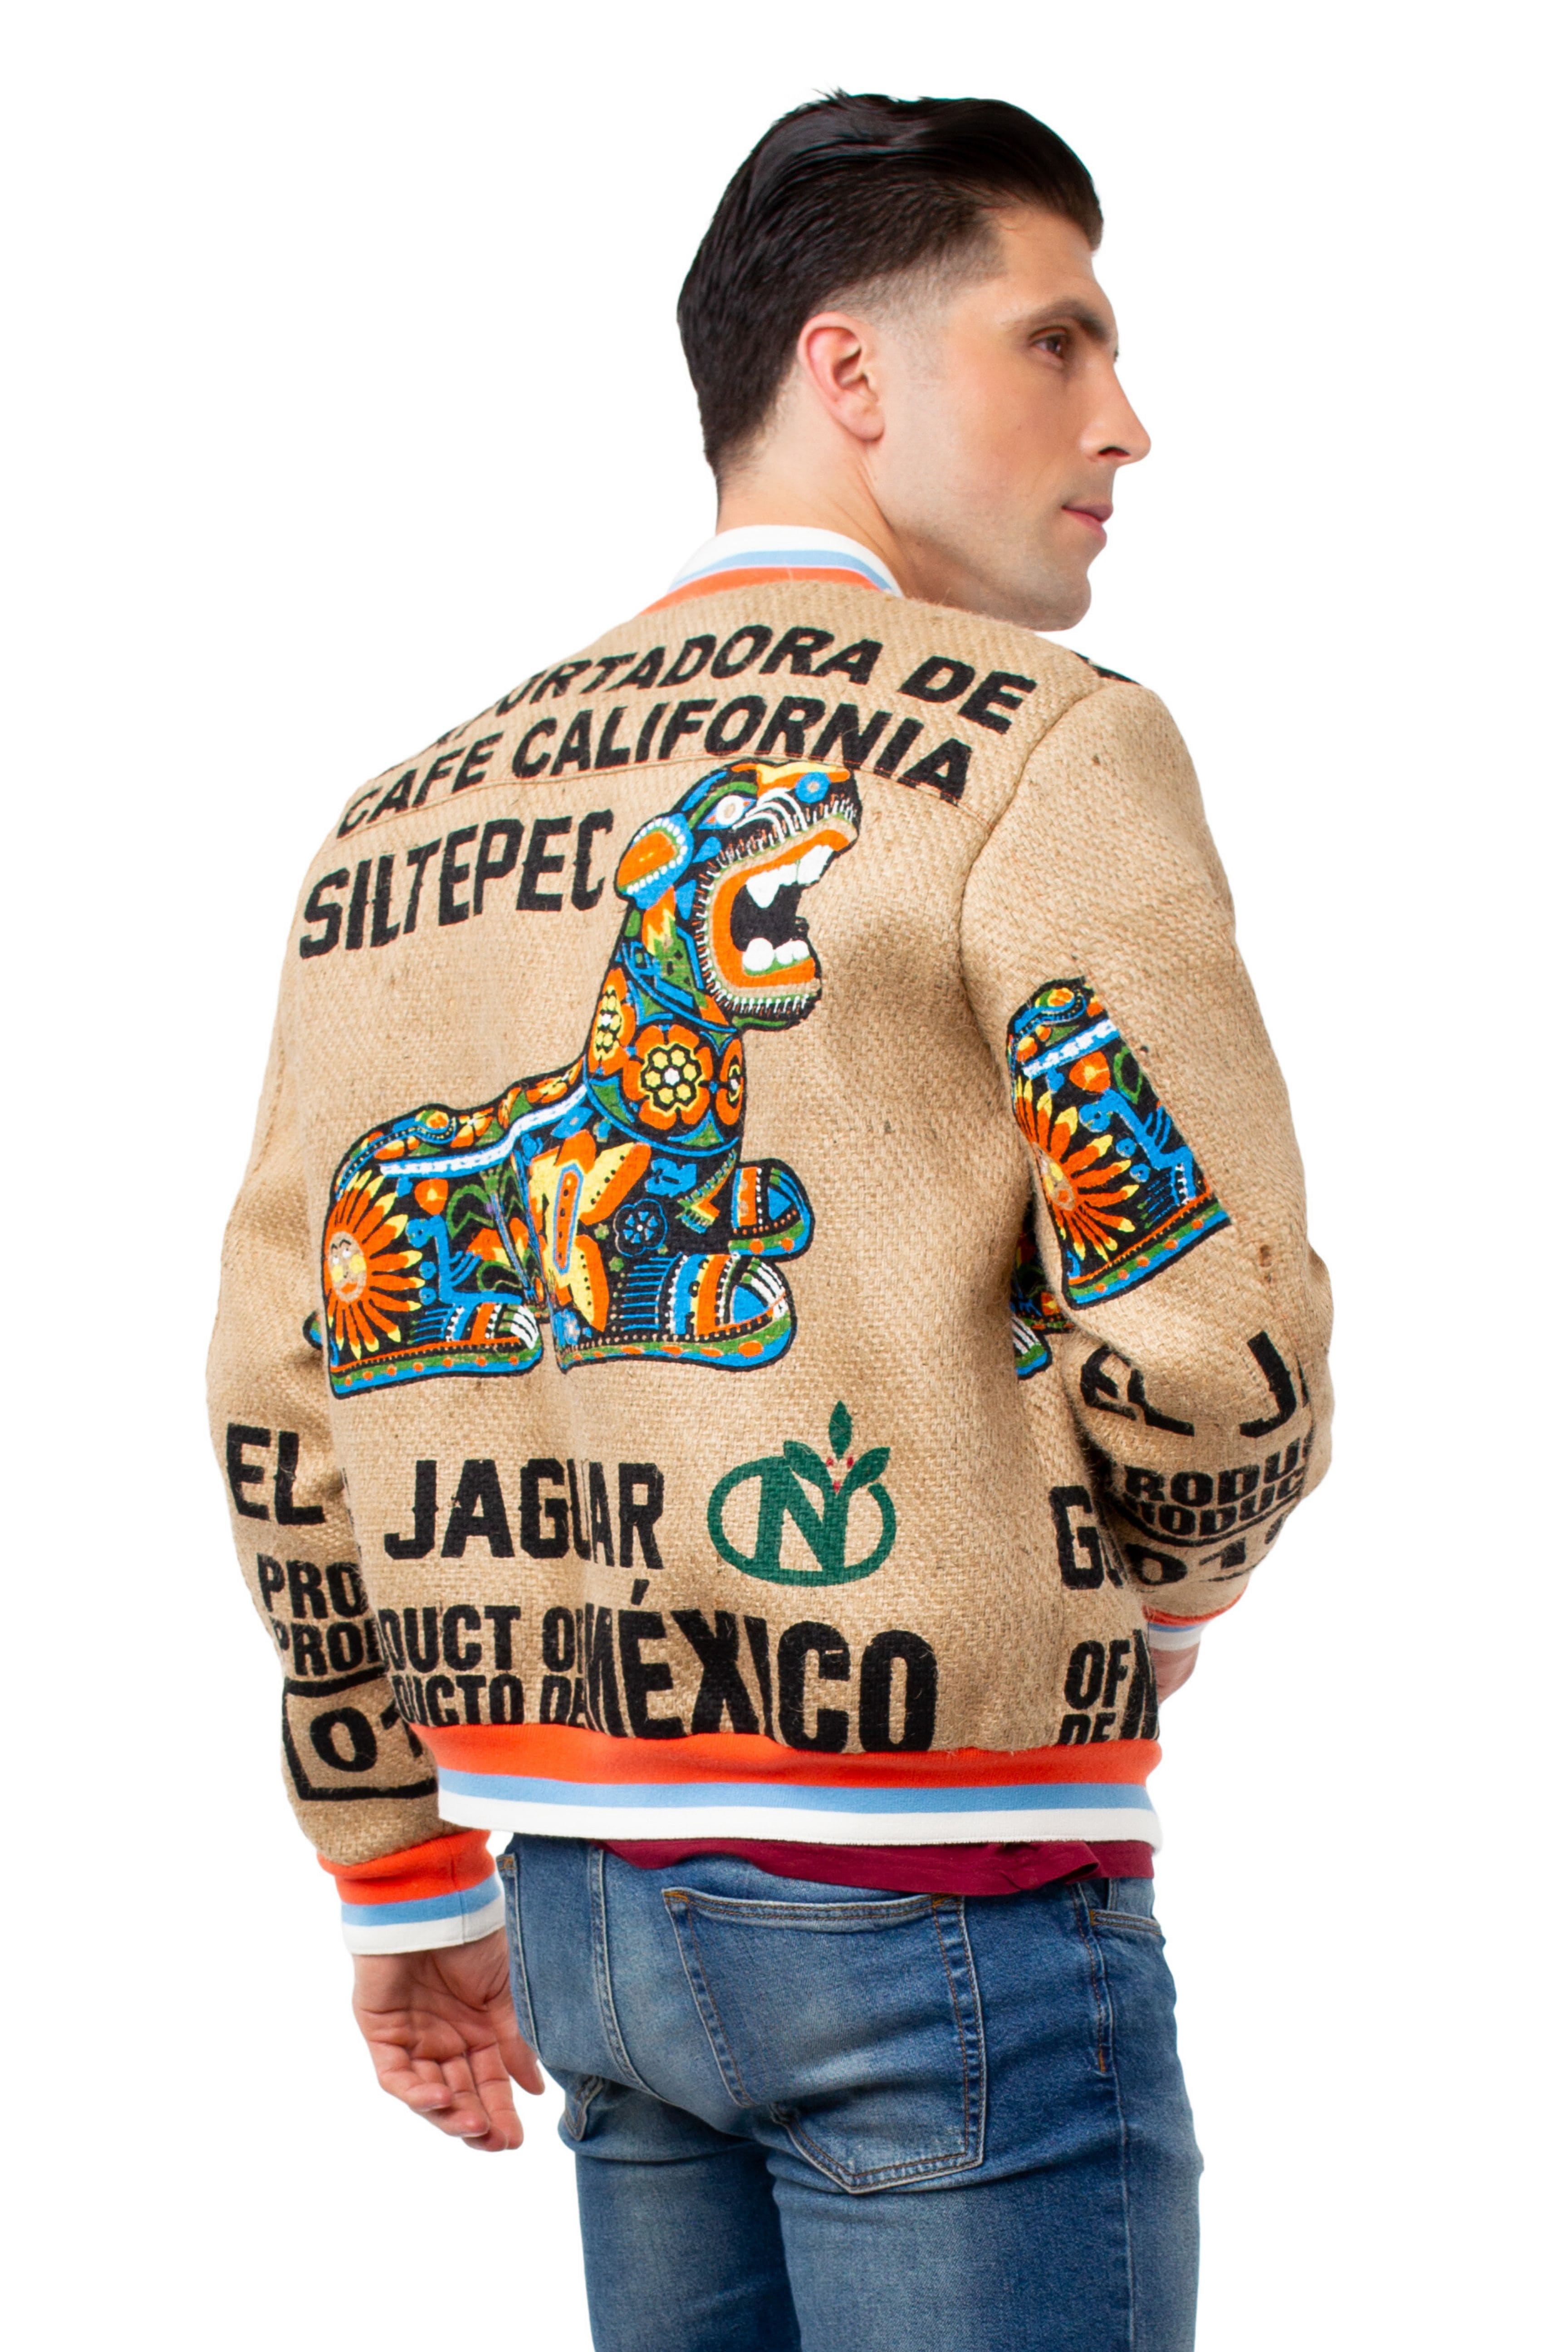 A man wearing an exquisit handmade bomber jacket made of upcyceled coffee sacks